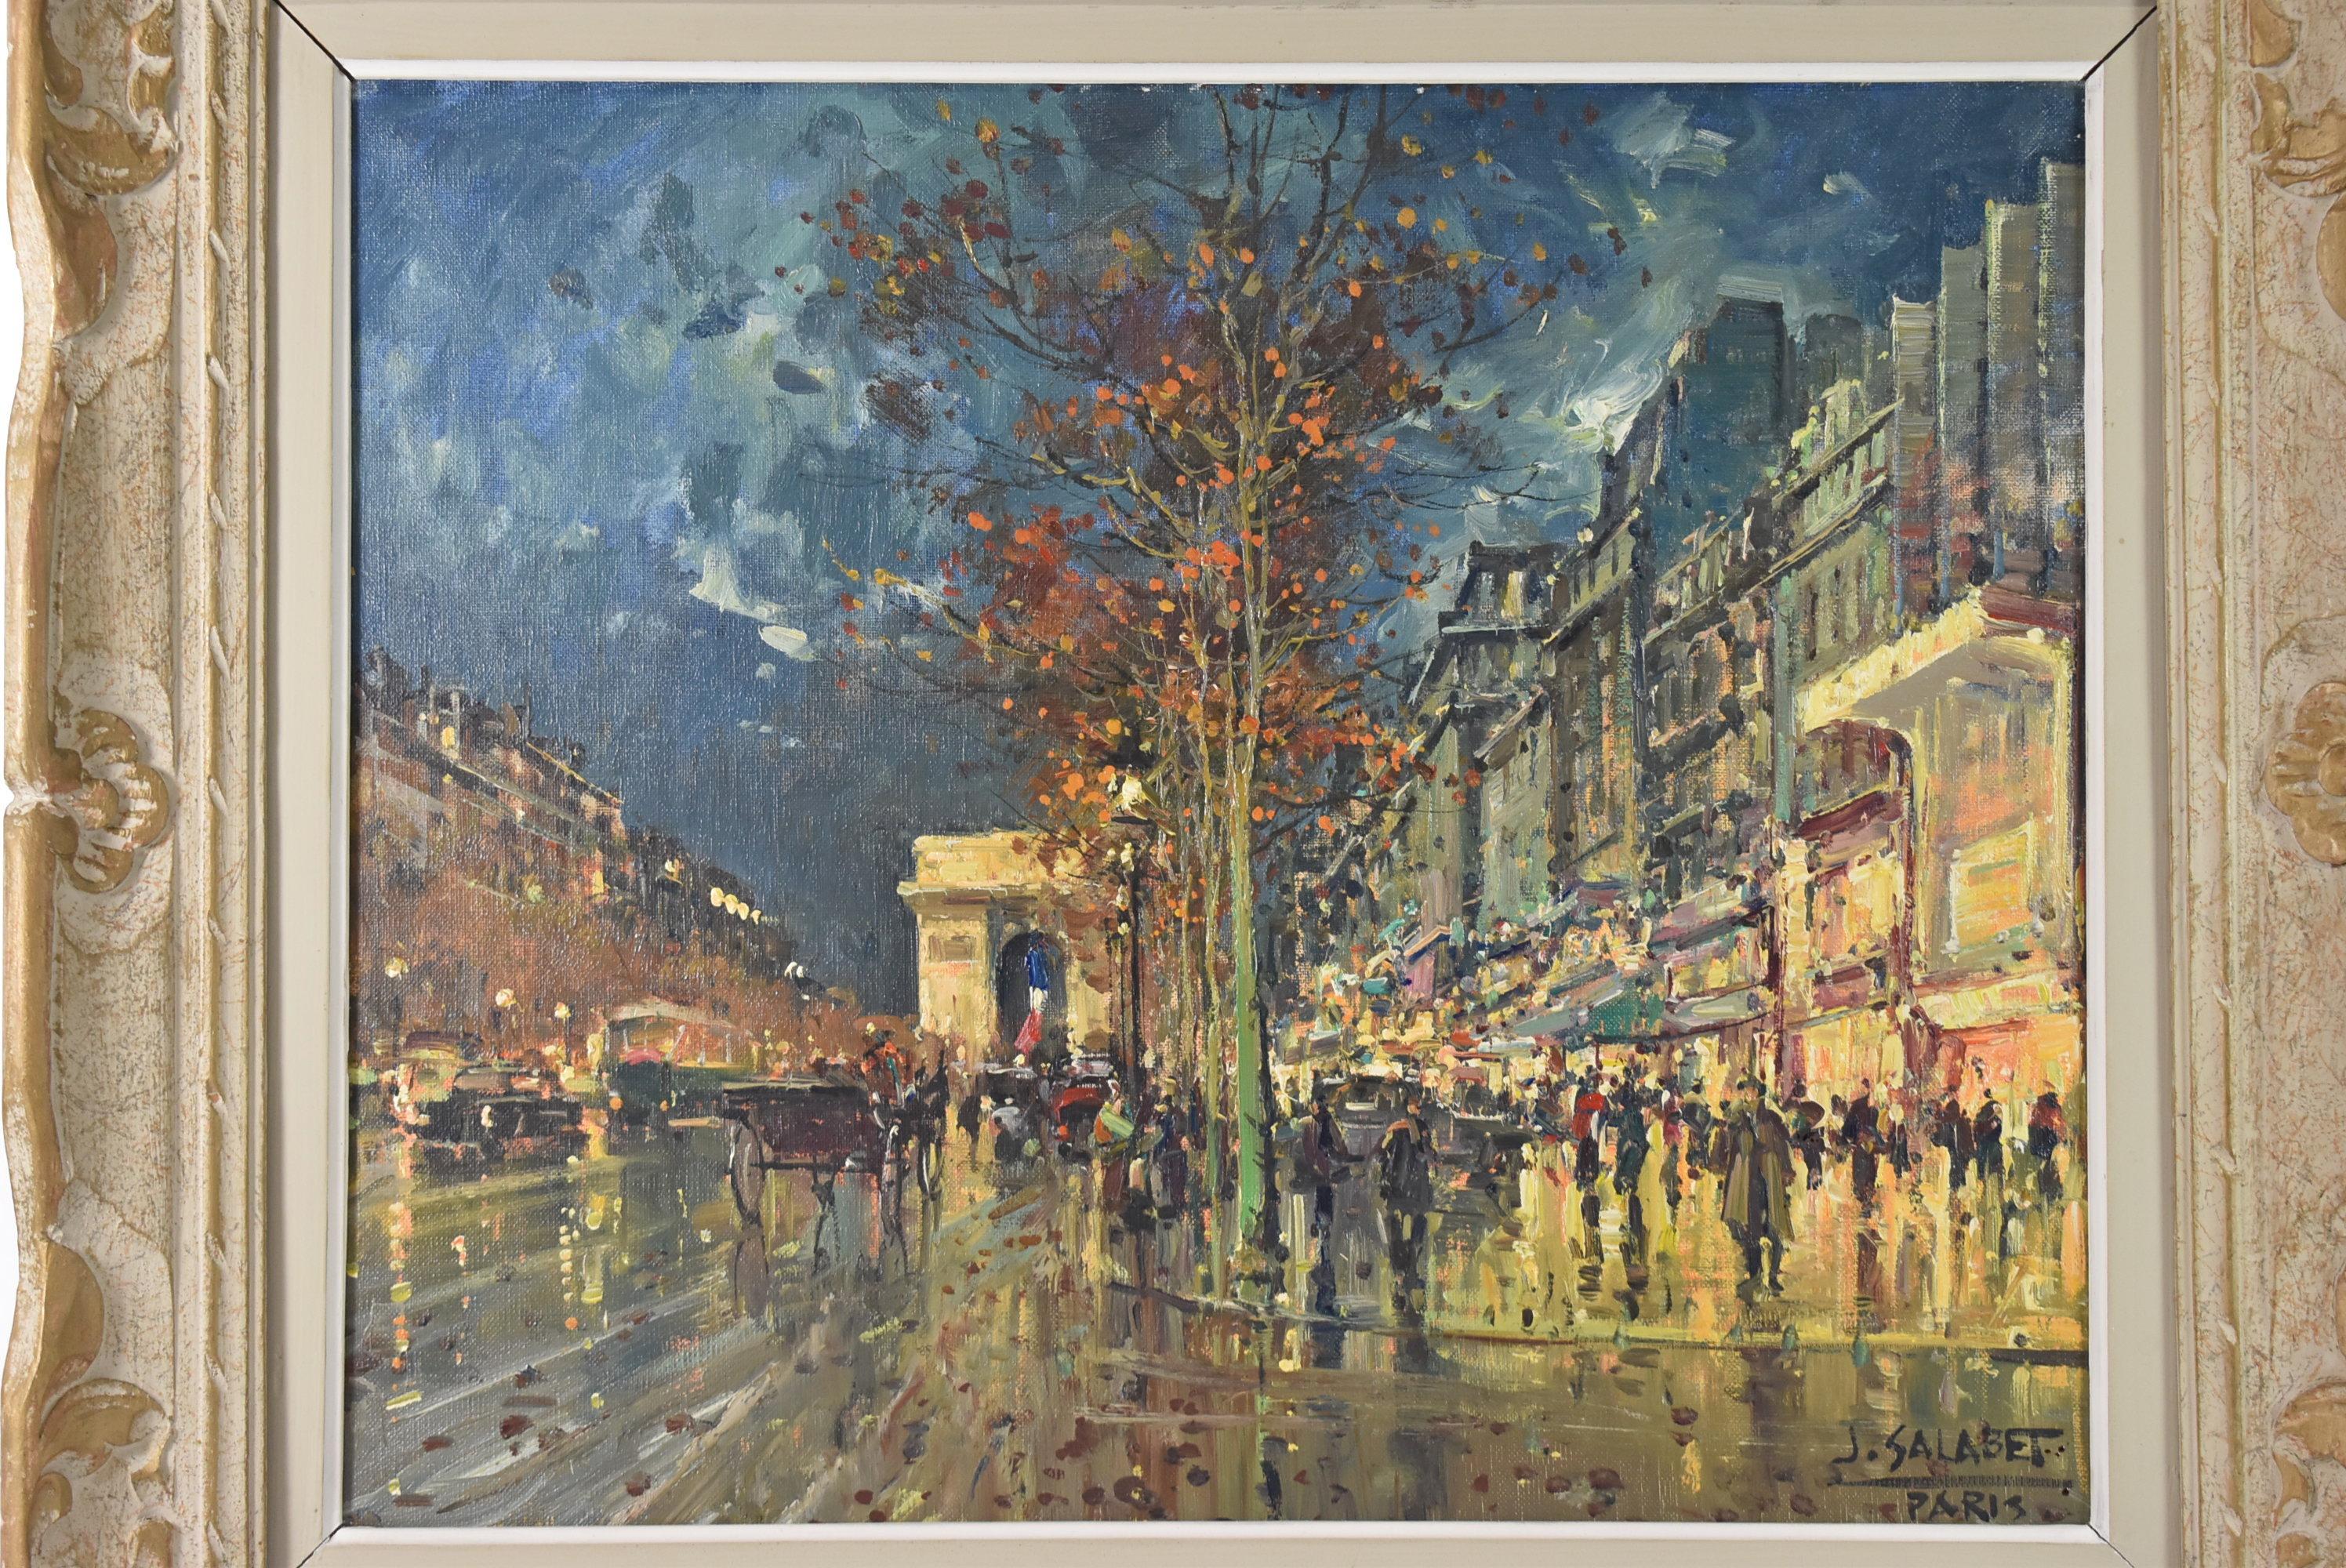 Paris Street Scene Oil Painting on Canvas, Arc de Triumphe, by Jean Salabet. Circa 1950's. Fall street scene in Paris with Arc de Triomphe in background. A rainy night with wet streets and sidewalks throwing reflections, cars, trolley, horse drawn